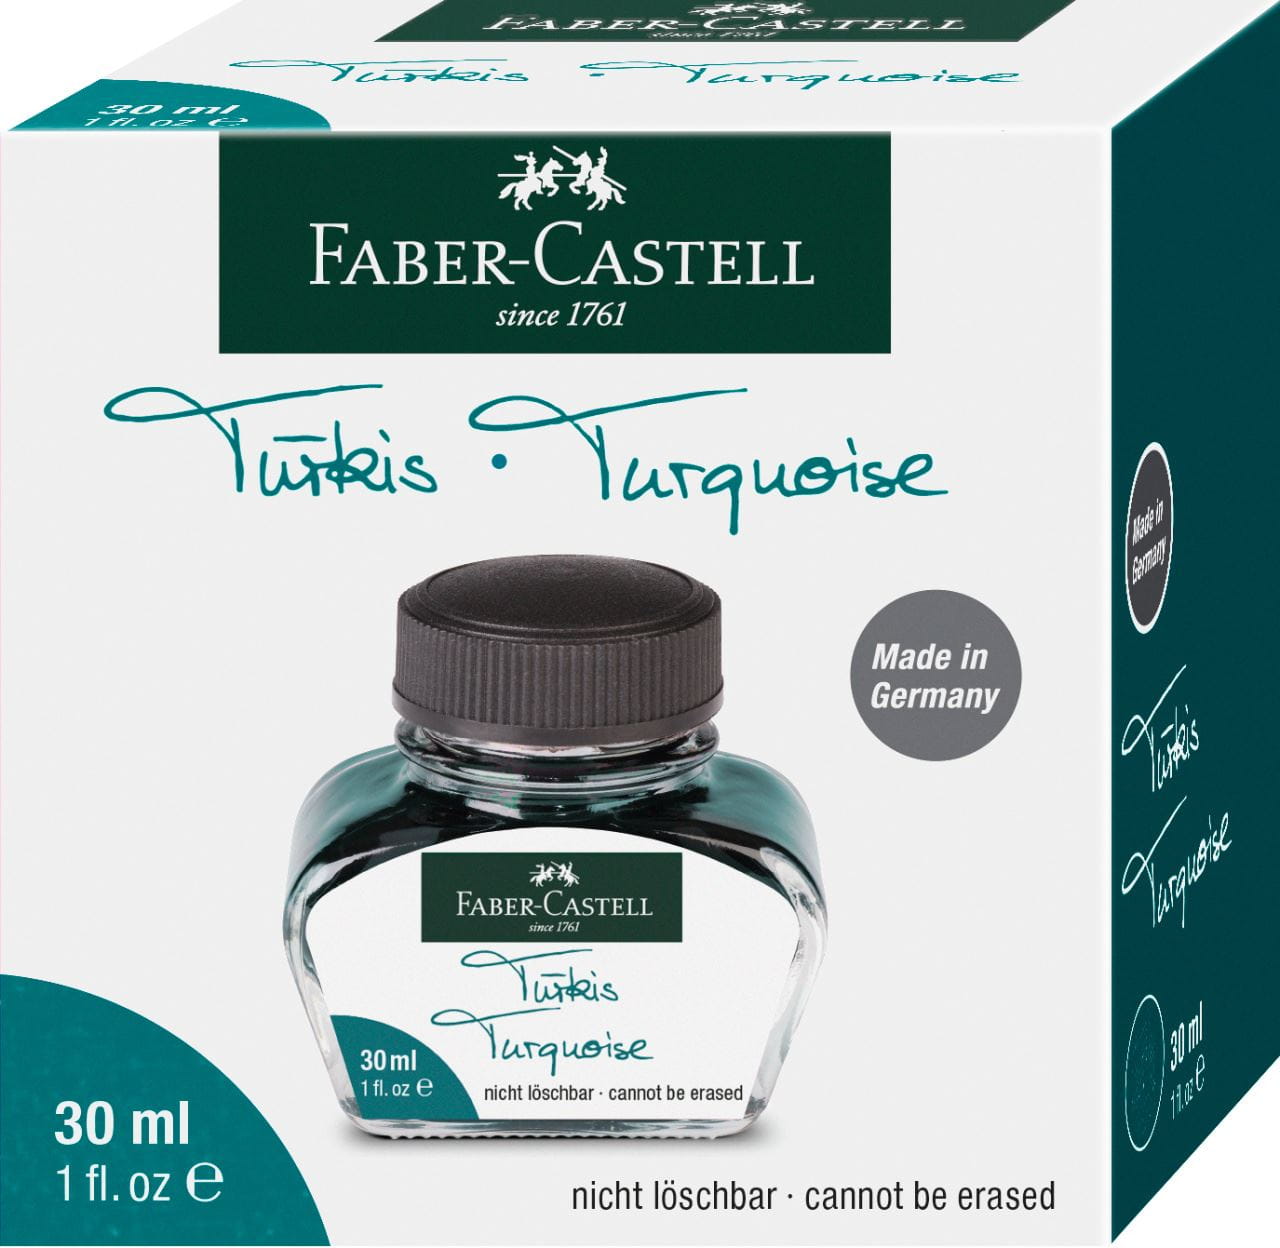 Faber-Castell - Flacon d'encre turquoise 30 ml